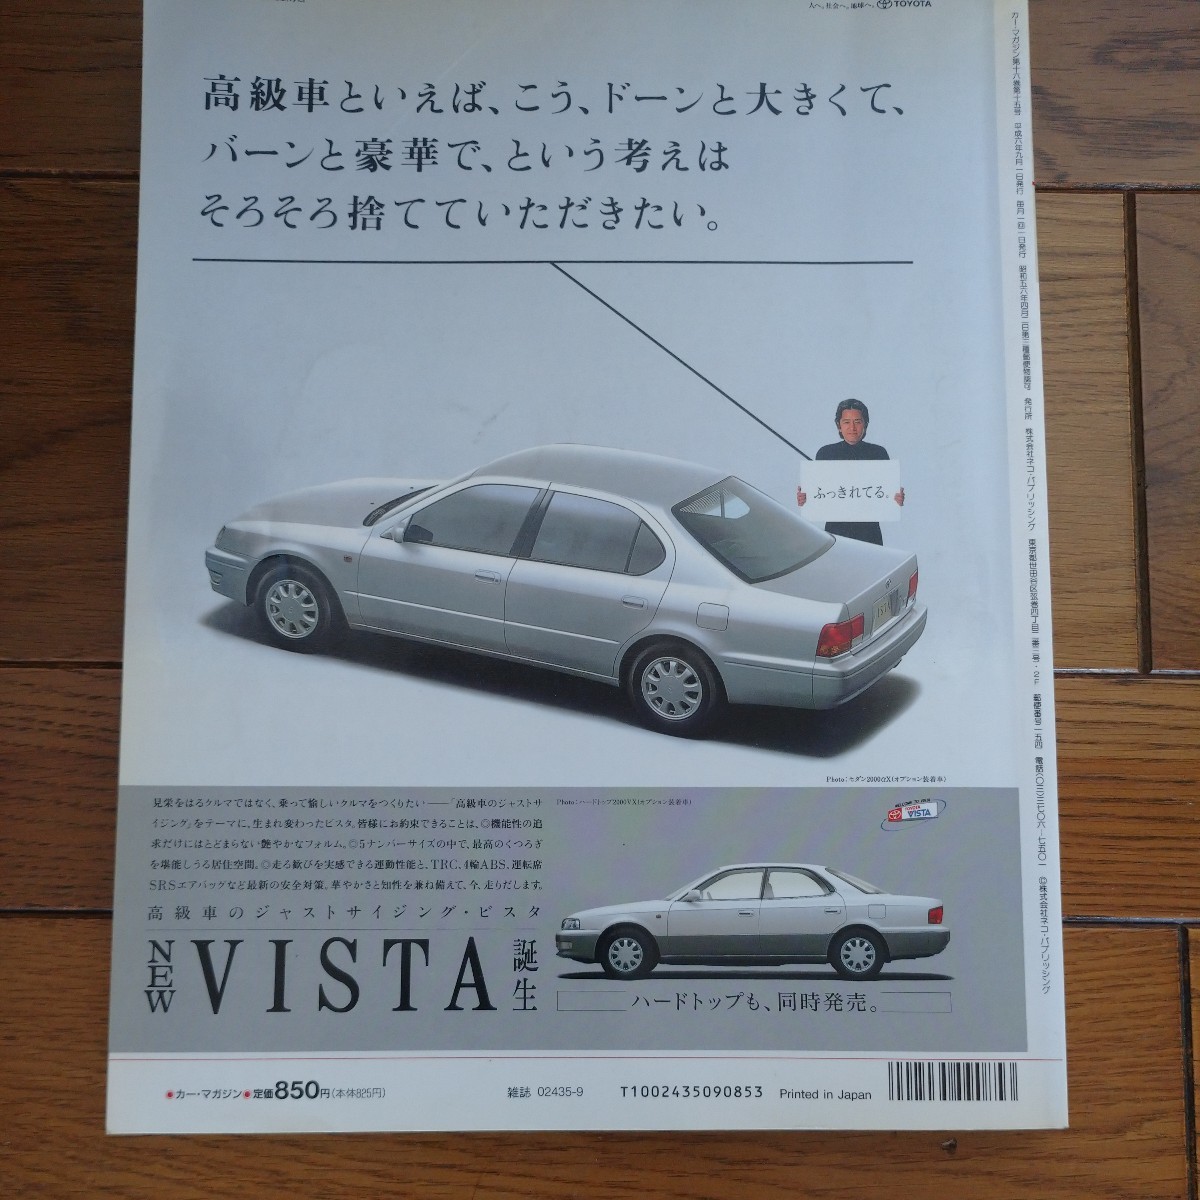  Ferrari F355 Impression publication car magazine 195 1994 year 9 month issue 371 page Renault Clio * Williams other 